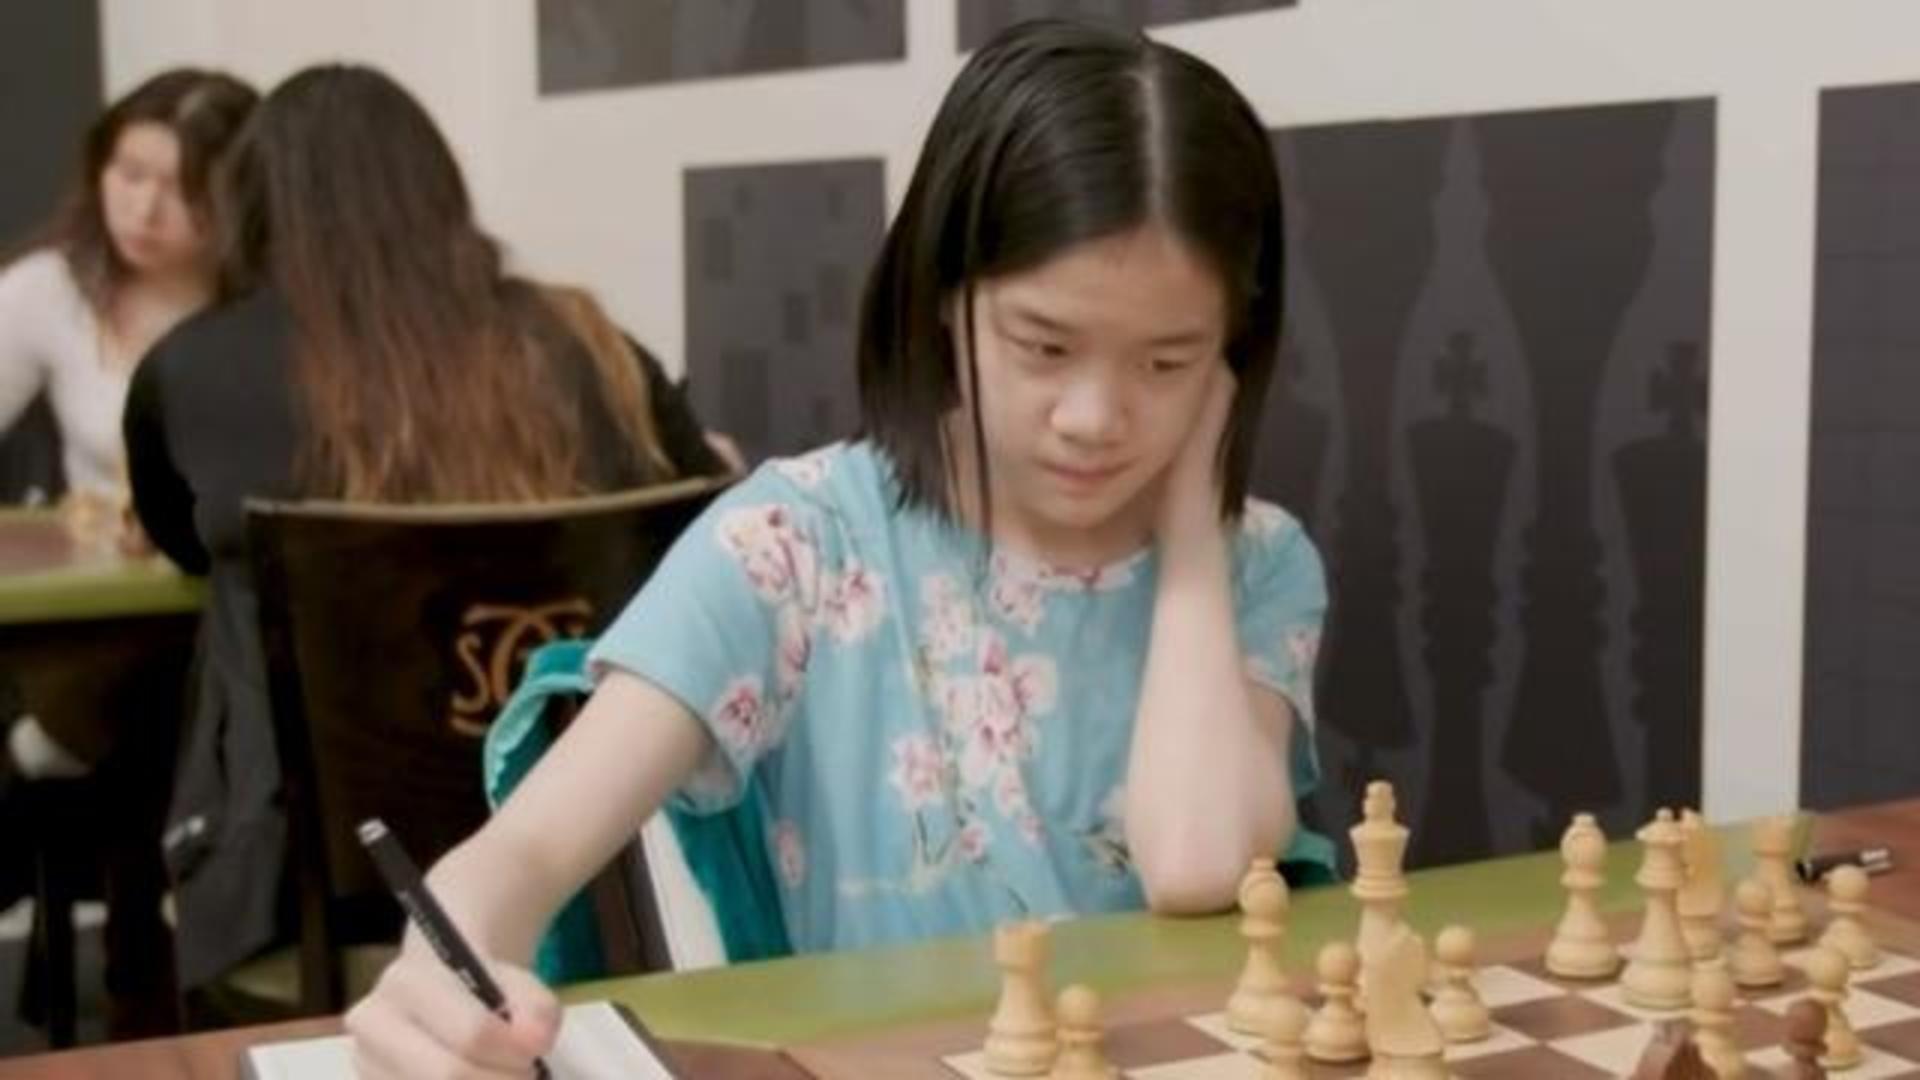 13-year-old Alice Lee becomes international chess master-elect